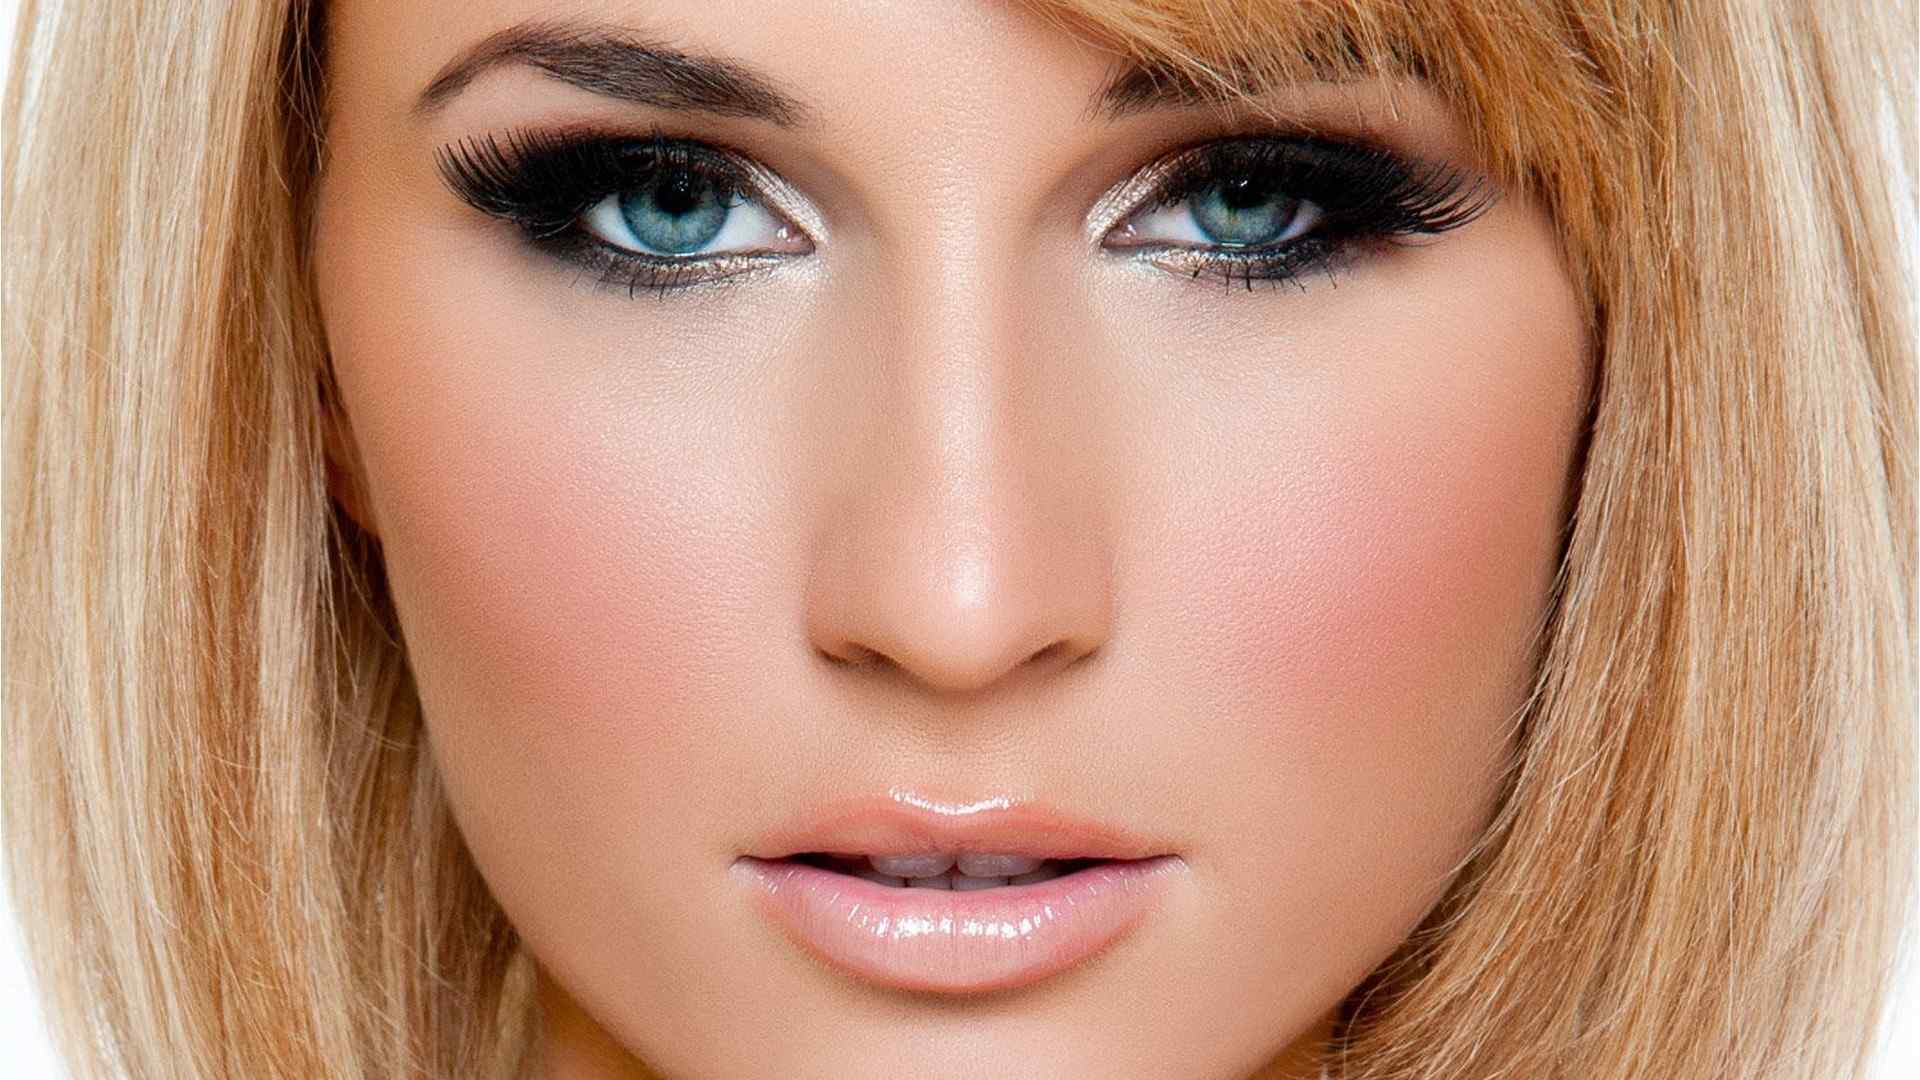 Makeup For Blue Eyes And Blonde Hair Eye Makeup For Blue Eyes Blonde Hair Stylesstar Com